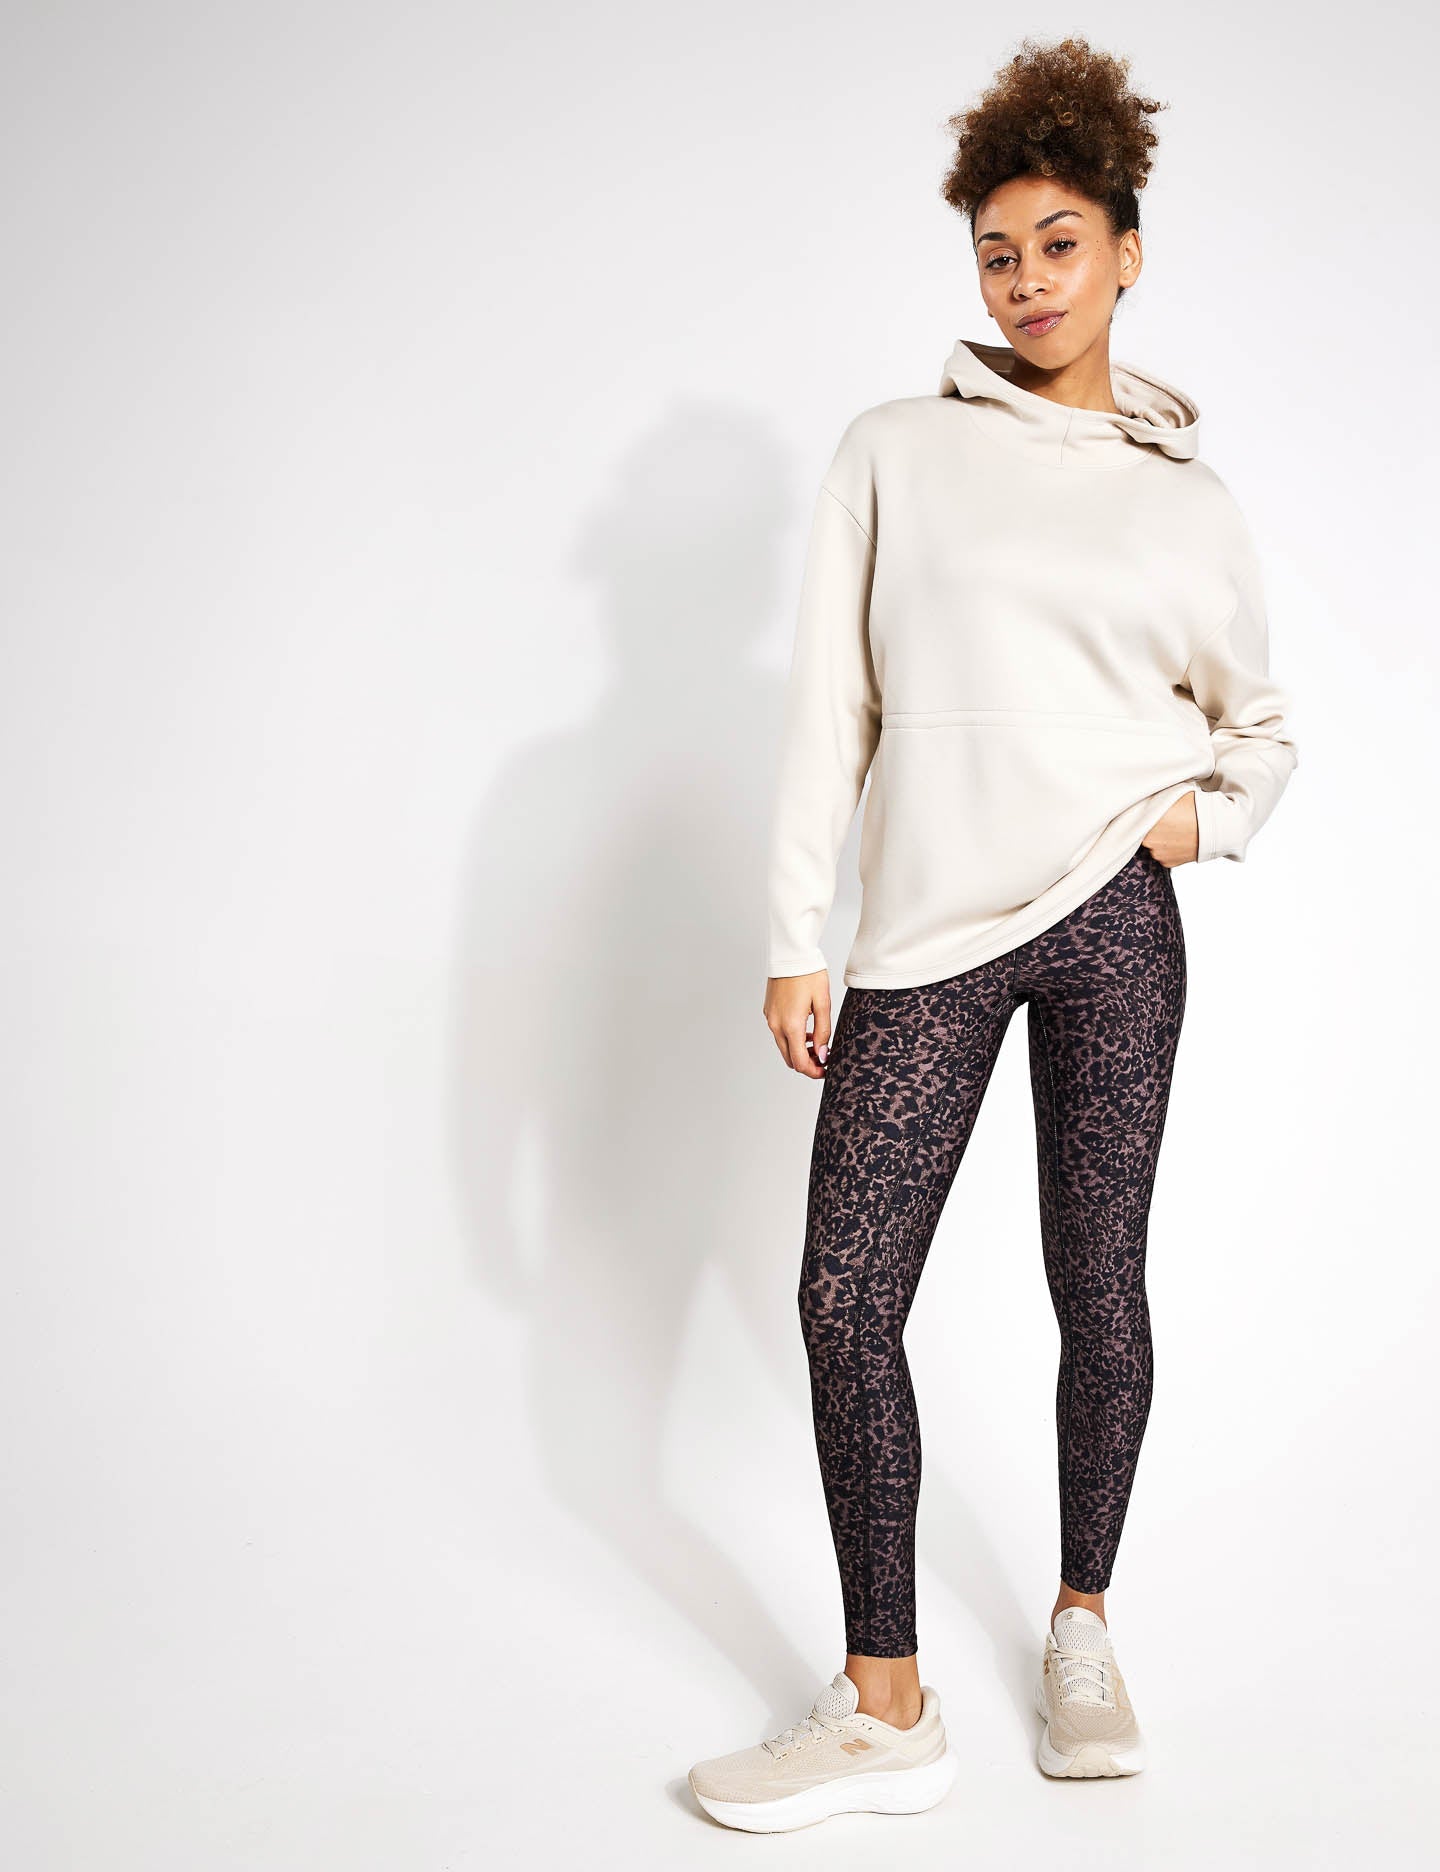 Shop GOODMOVE Women's Print Leggings up to 50% Off